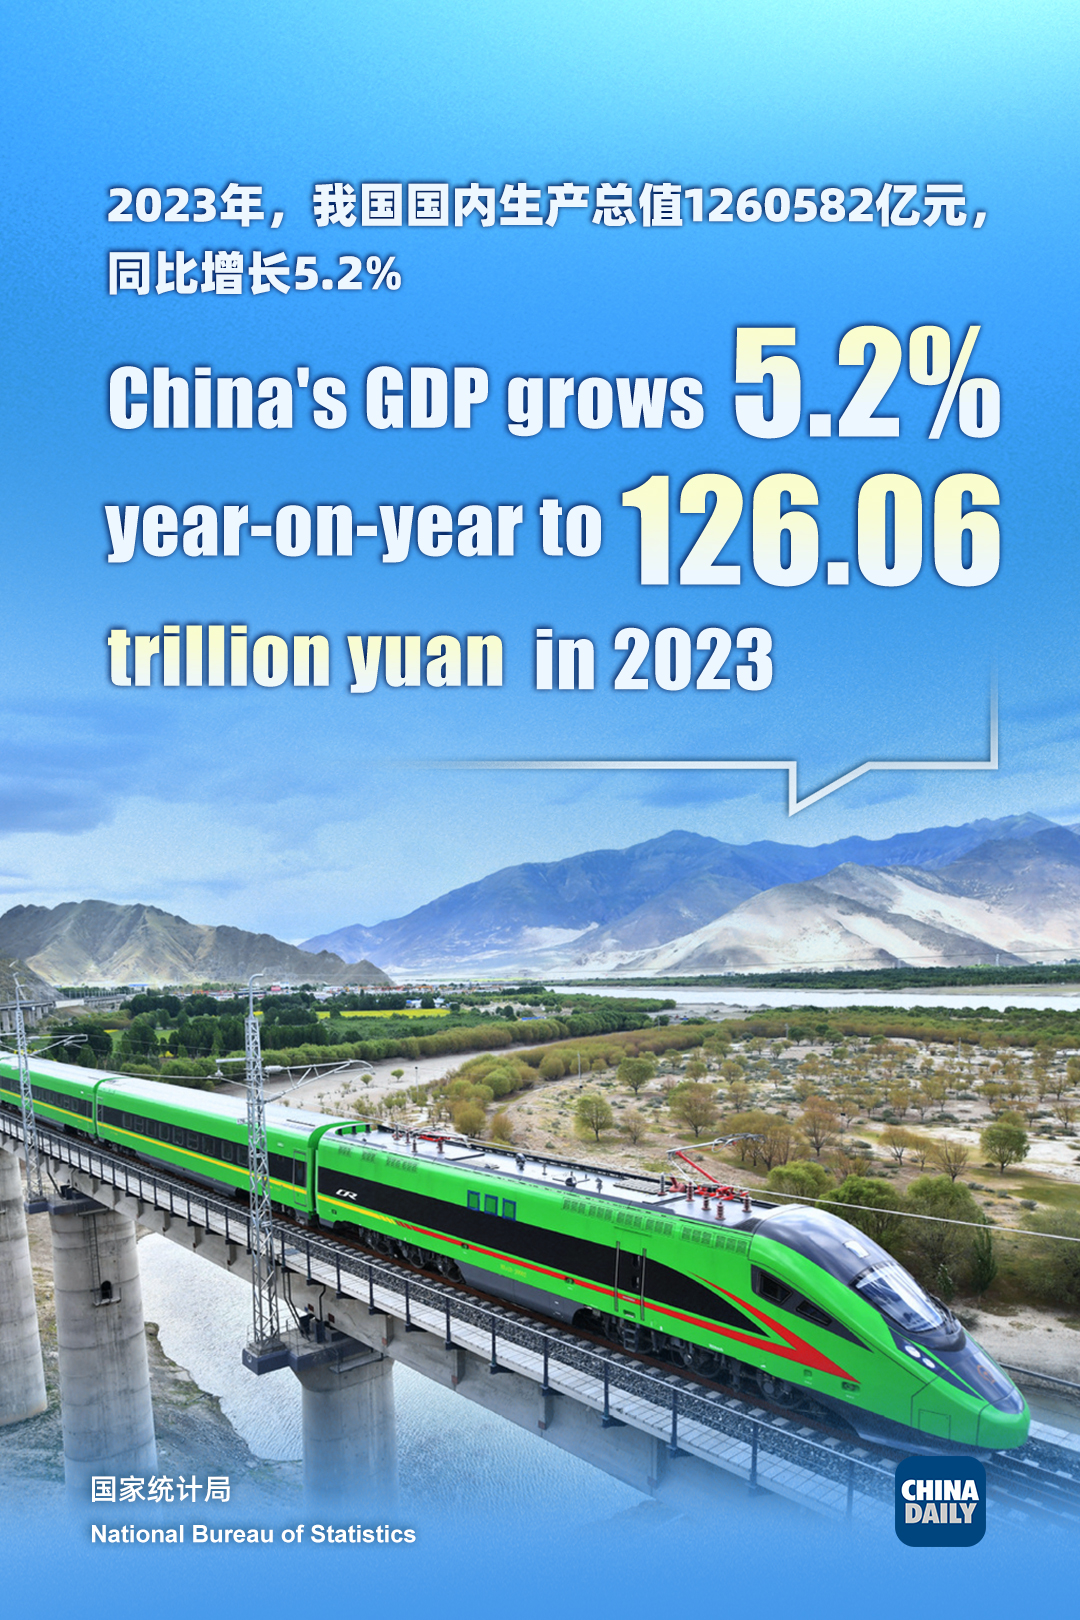 China reports 5.2% GDP growth for 2023